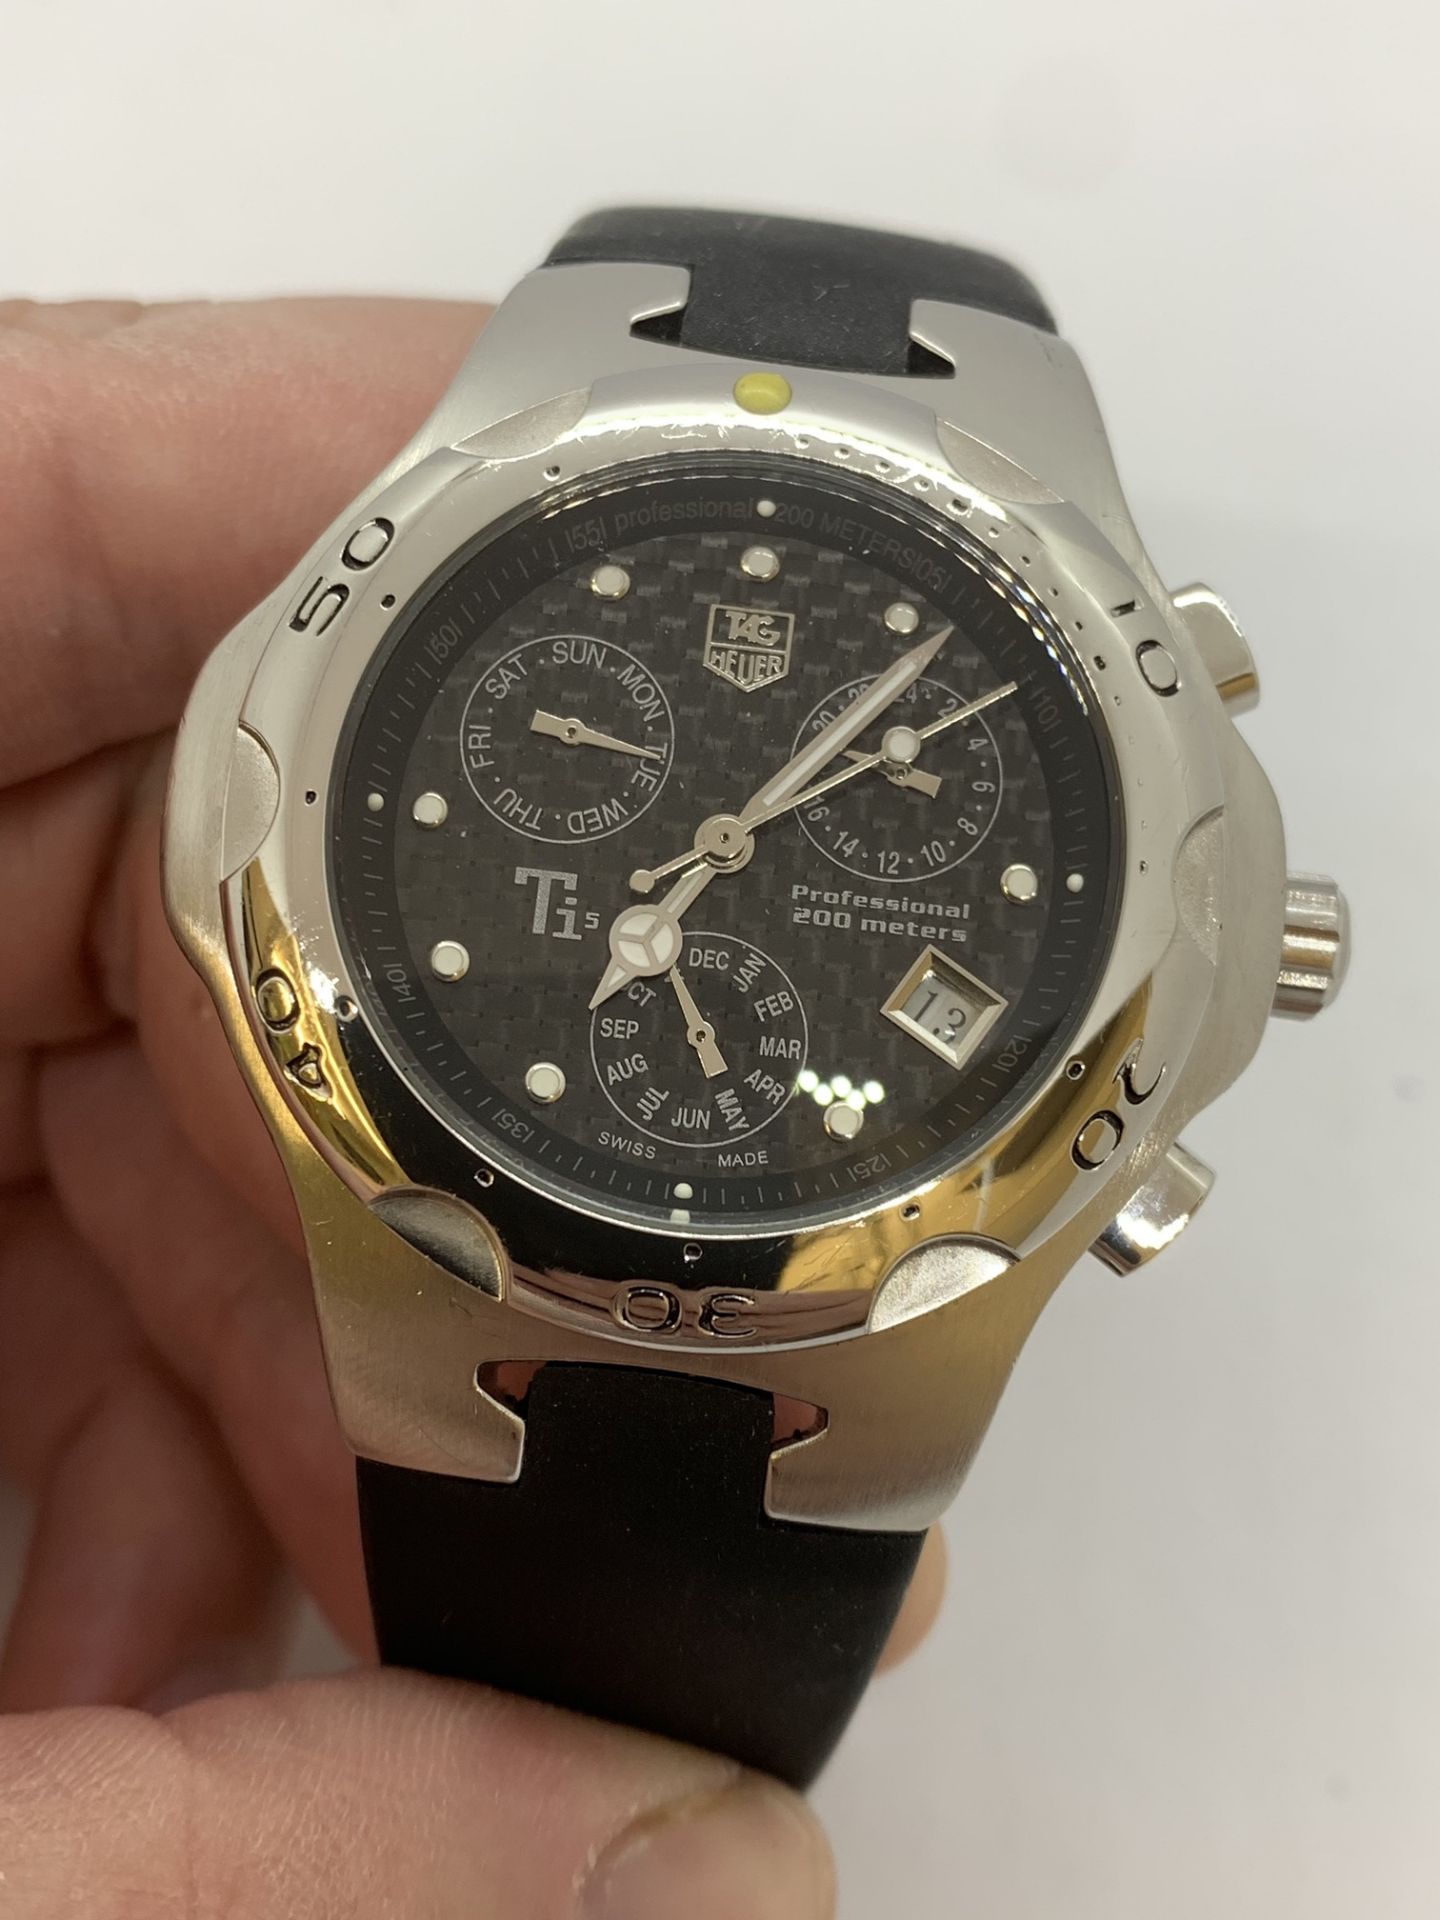 TAG HEUER PROFESSIONAL CHRONO AUTOMATIC WATCH - 200 METERS - Image 11 of 11